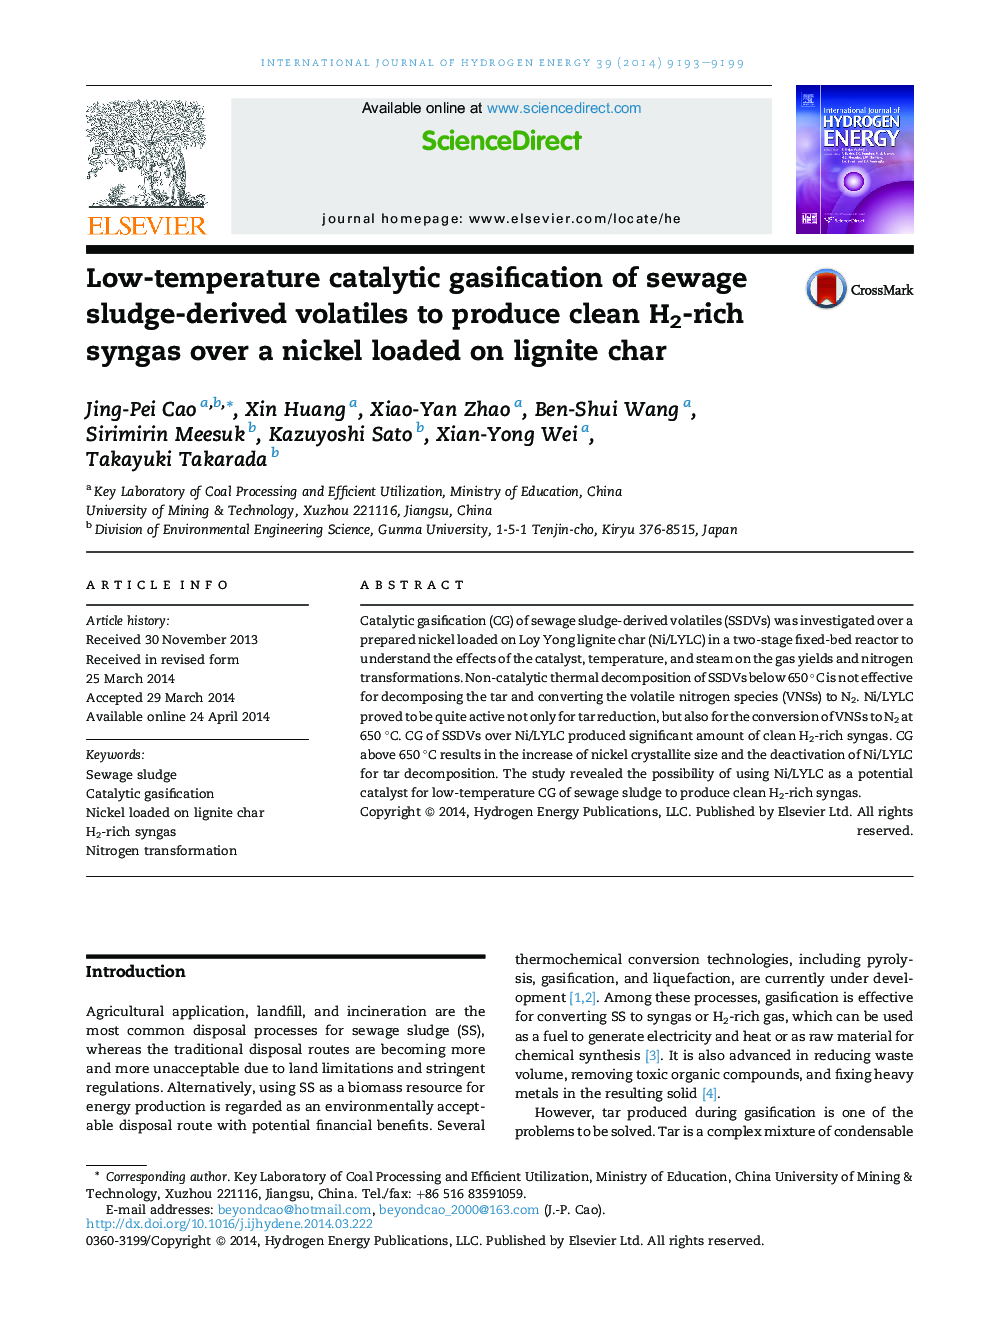 Low-temperature catalytic gasification of sewage sludge-derived volatiles to produce clean H2-rich syngas over a nickel loaded on lignite char